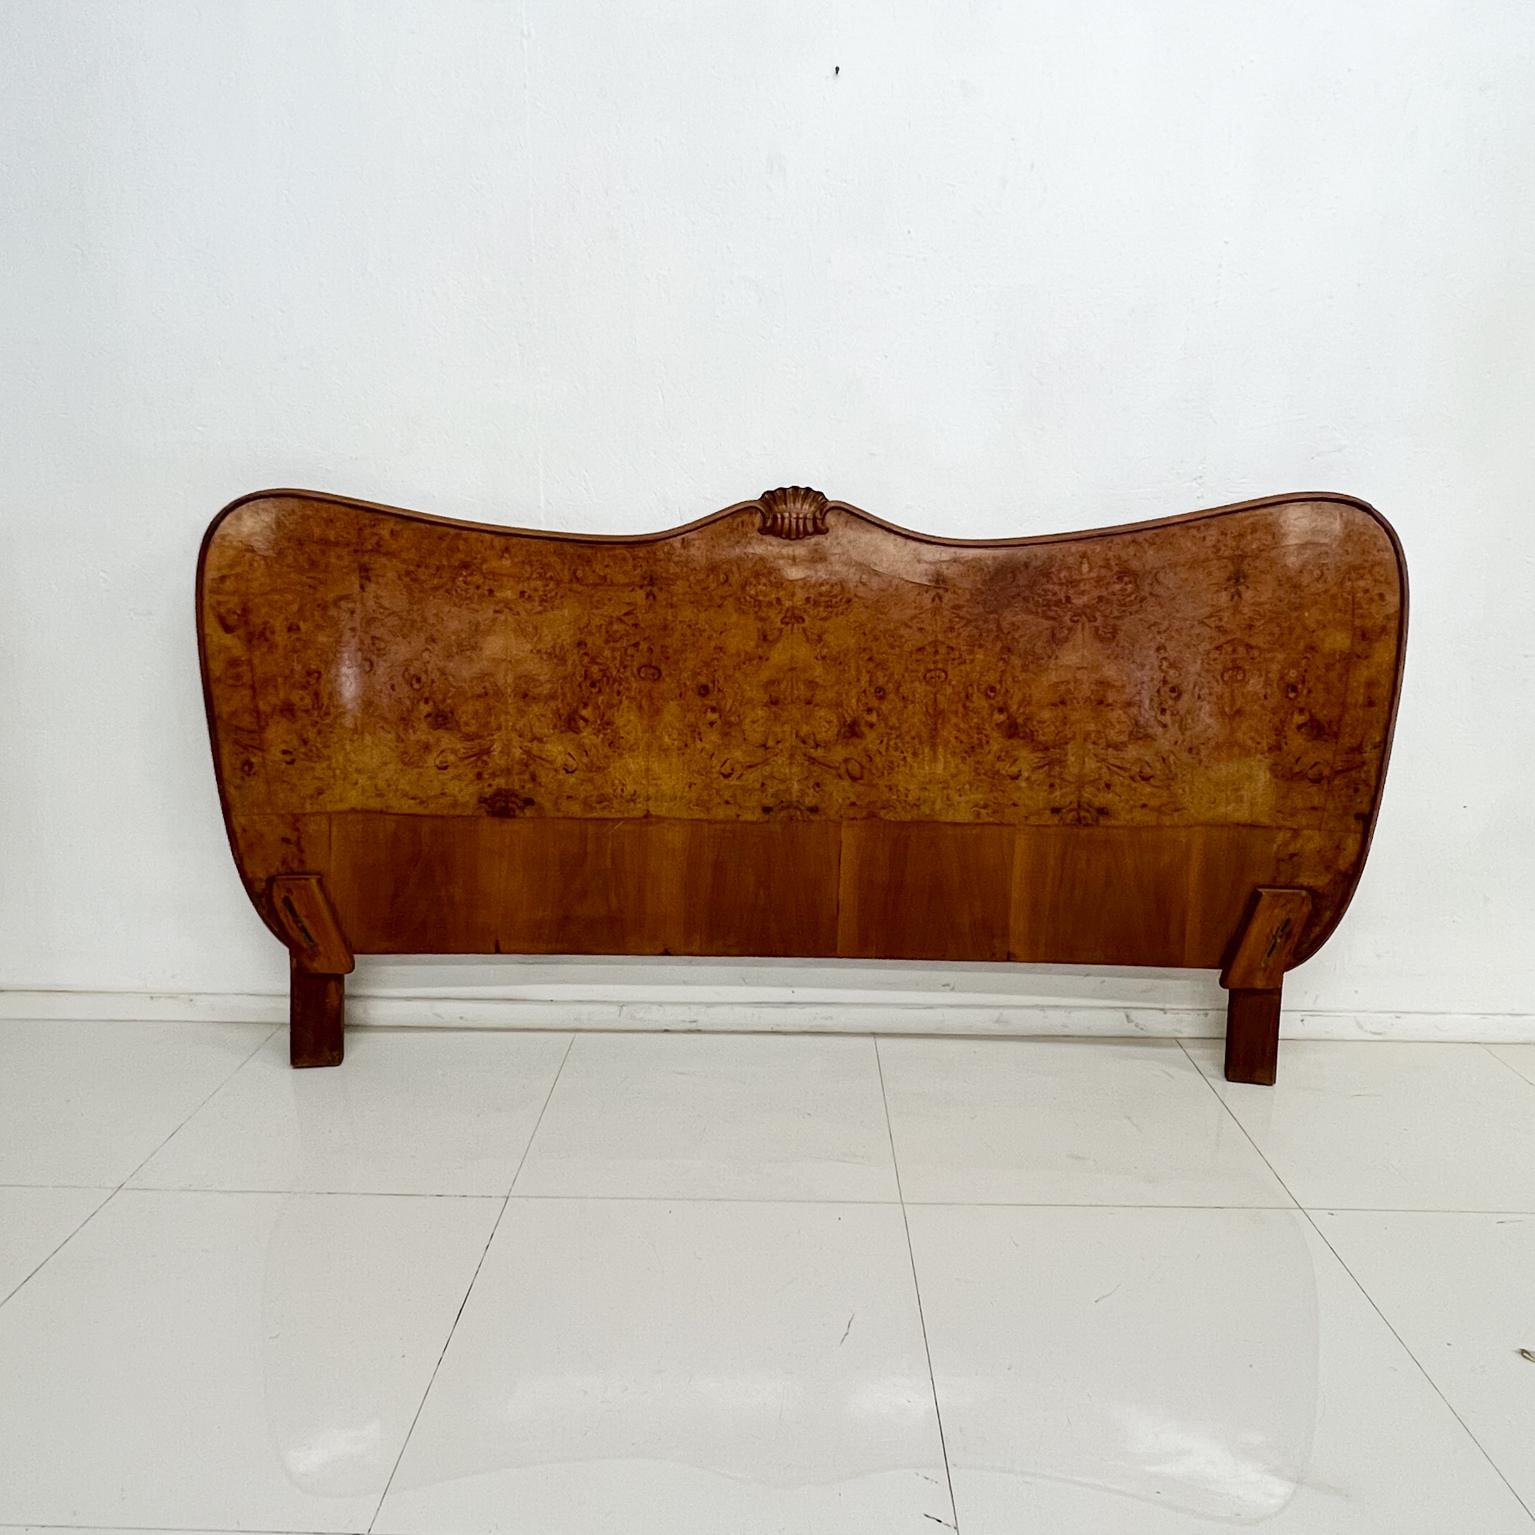 Italian KING Headboard
European vintage sculptural Italian burlwood scroll convex crown headboard
Handcrafted Italy
Milano stamp
Measures: 83.5 width x 43 tall x 4.75 depth with curve, 2.25 thickness
Preowned unrestored vintage condition.
See images